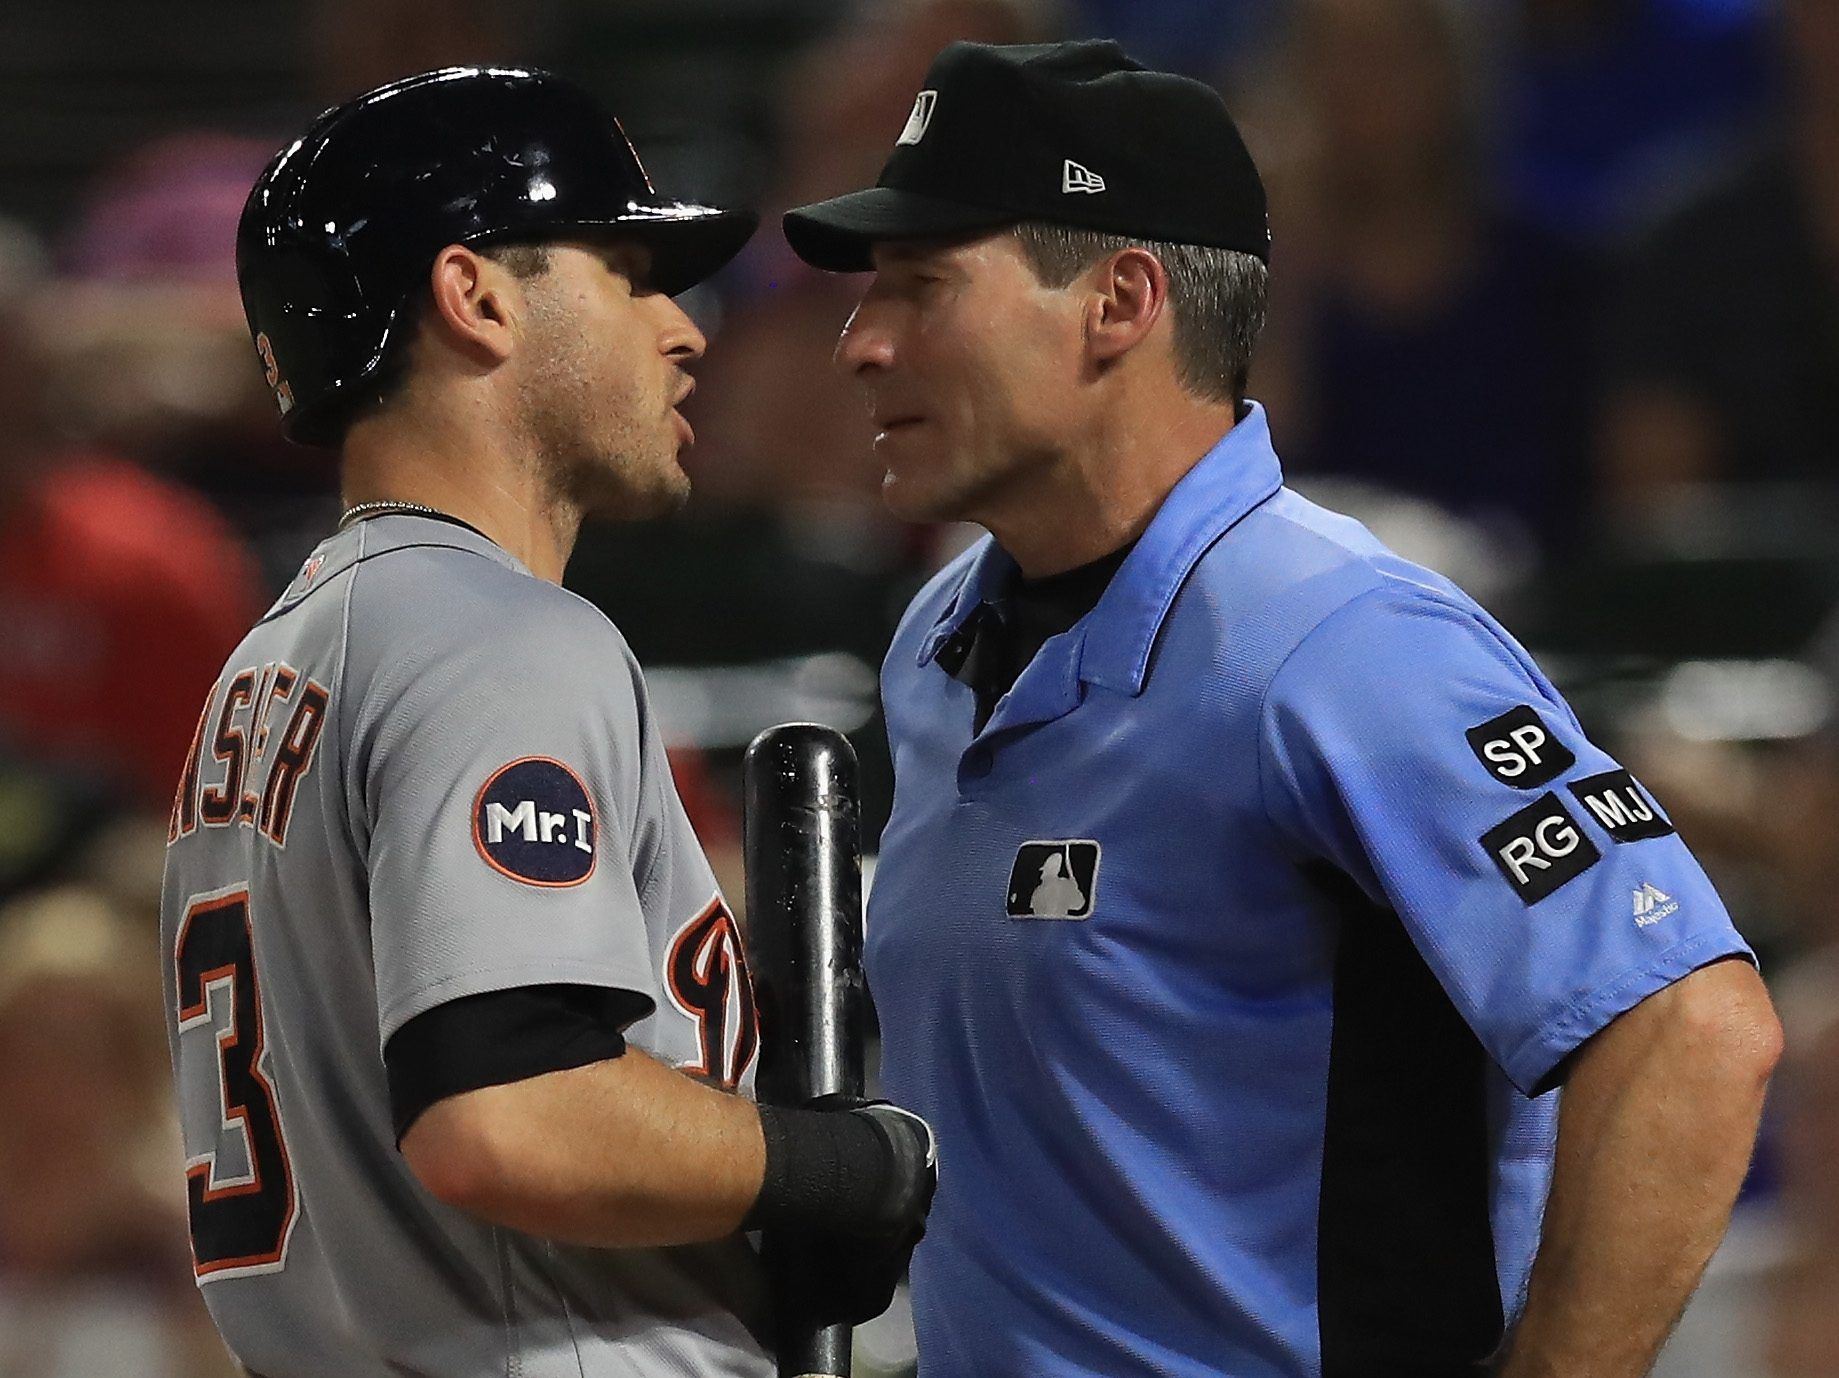 Where in the world is controversial MLB umpire Angel Hernandez?